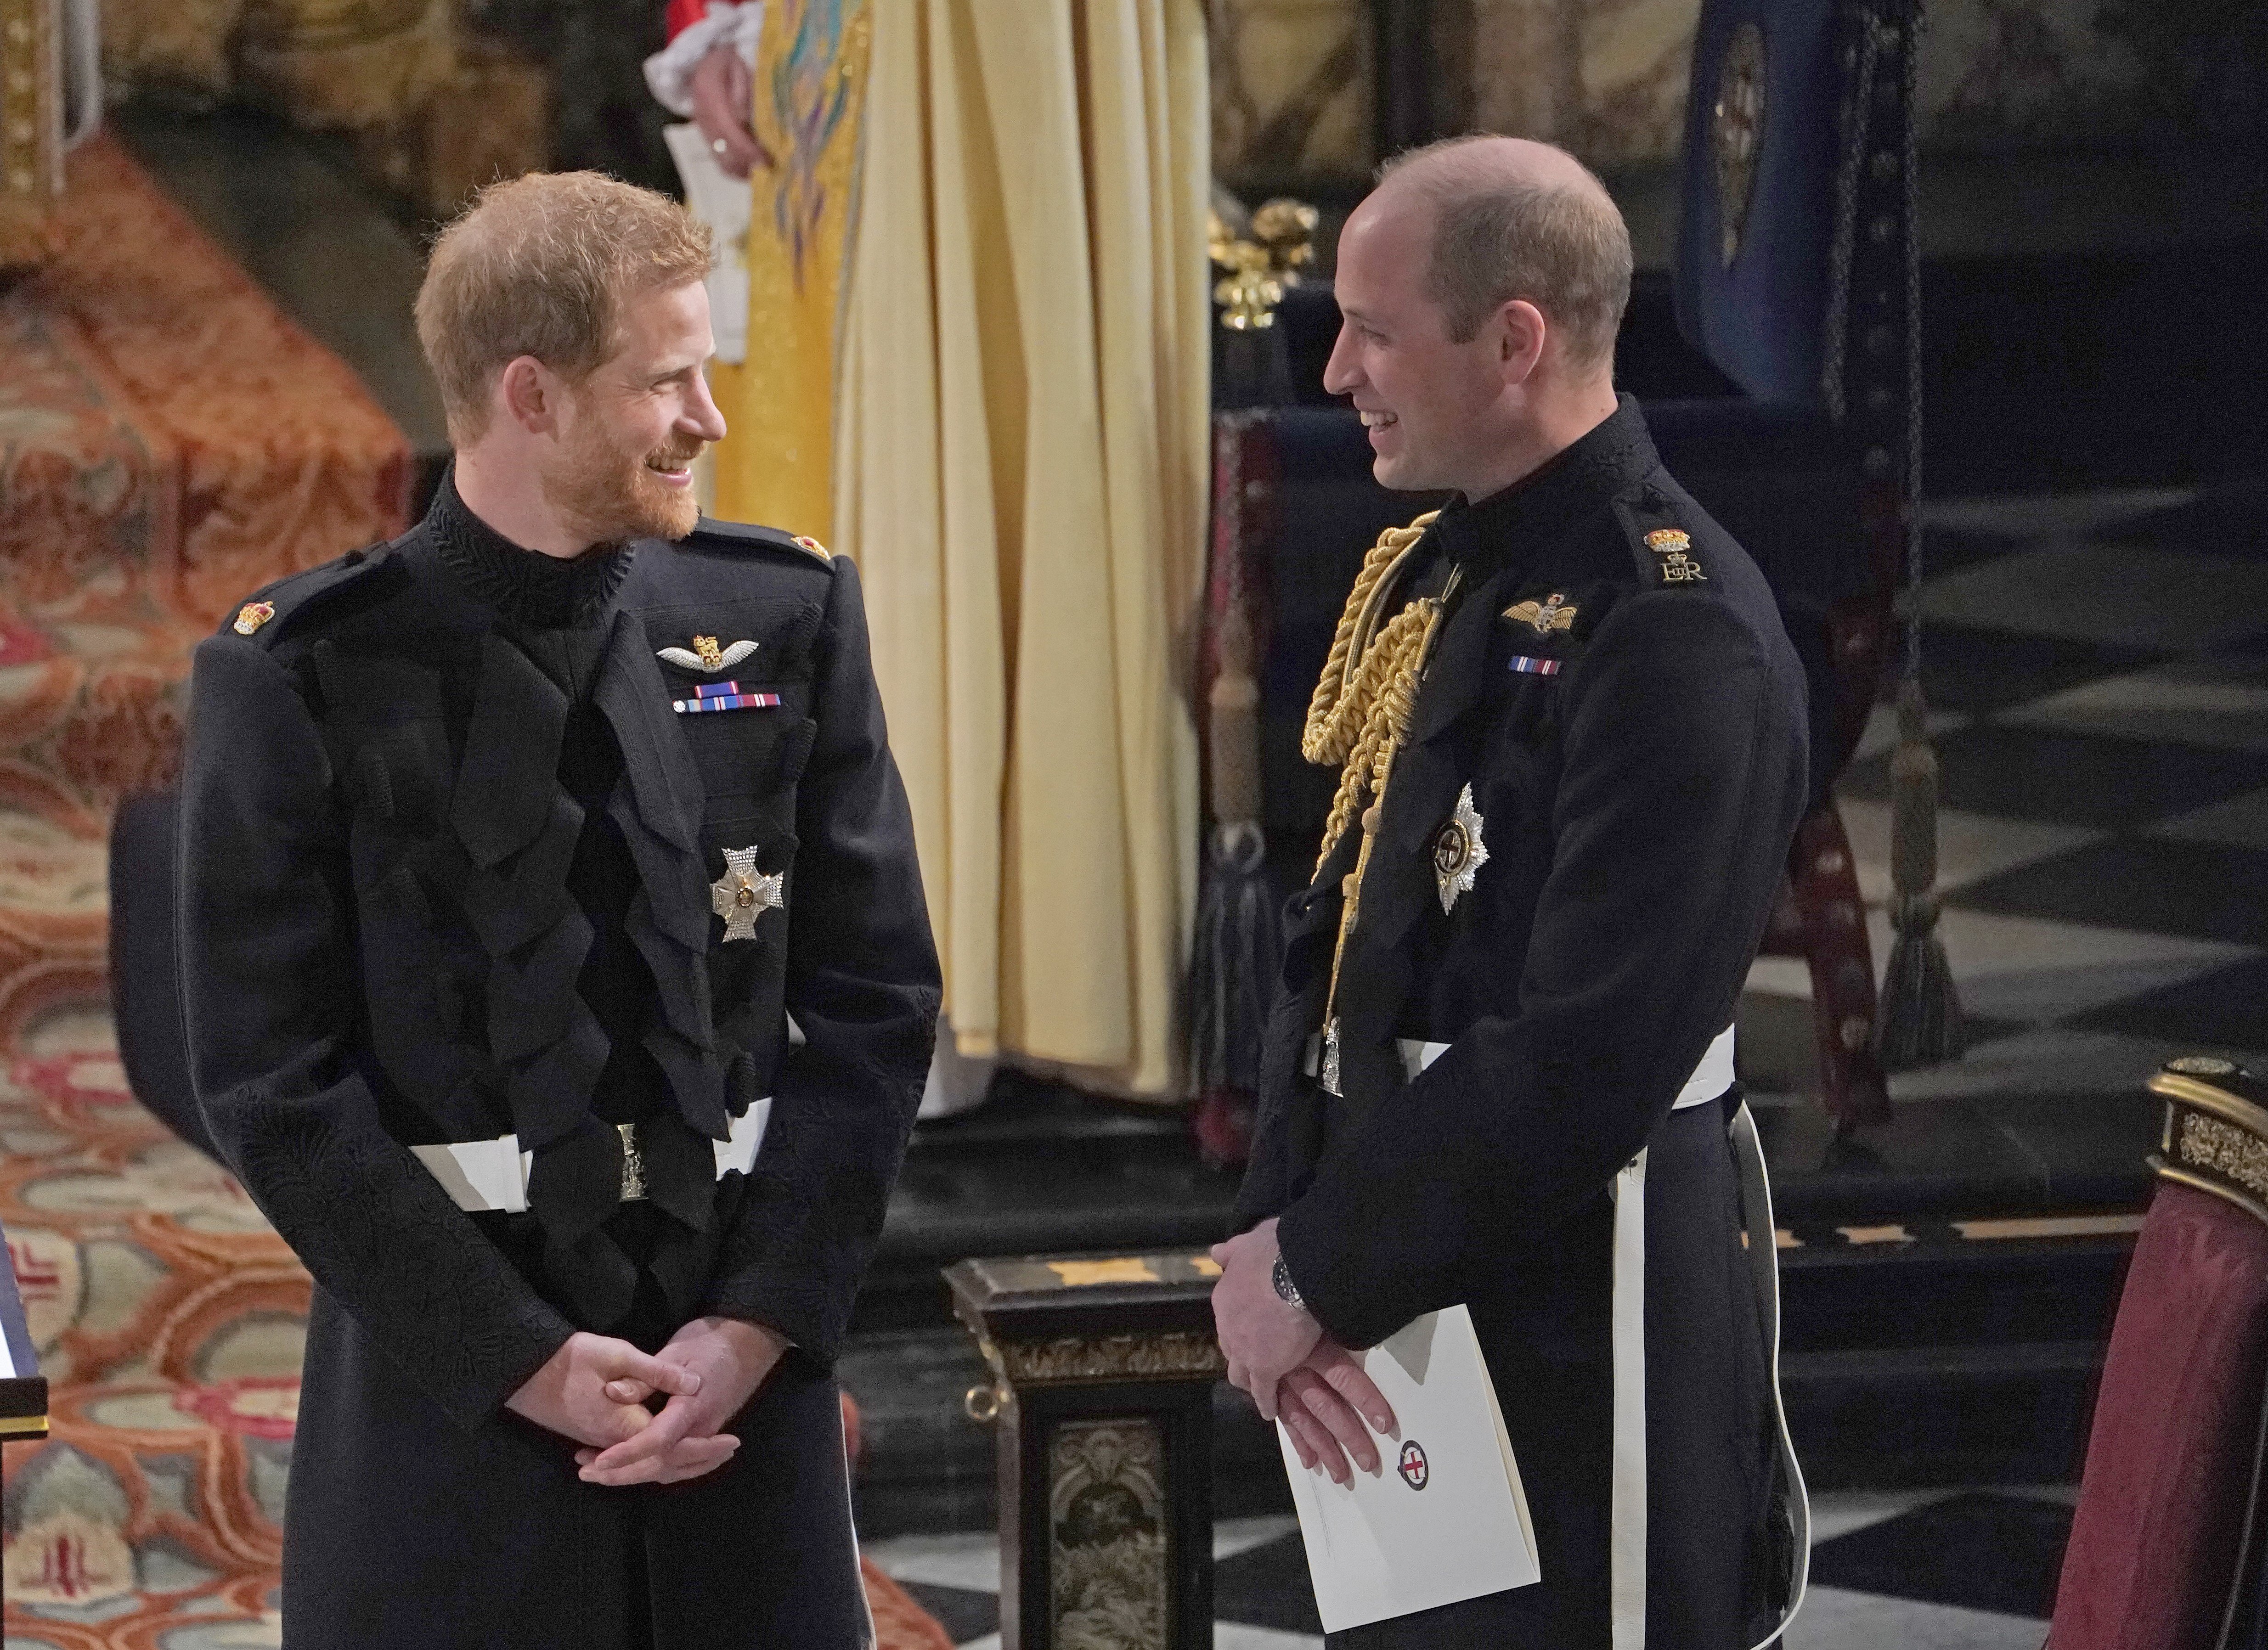 Prince Harry and Prince William at the former's wedding ceremony to Meghan Markle at St George's Chapel on May 19, 2018, in Windsor, England. | Source: Getty Images